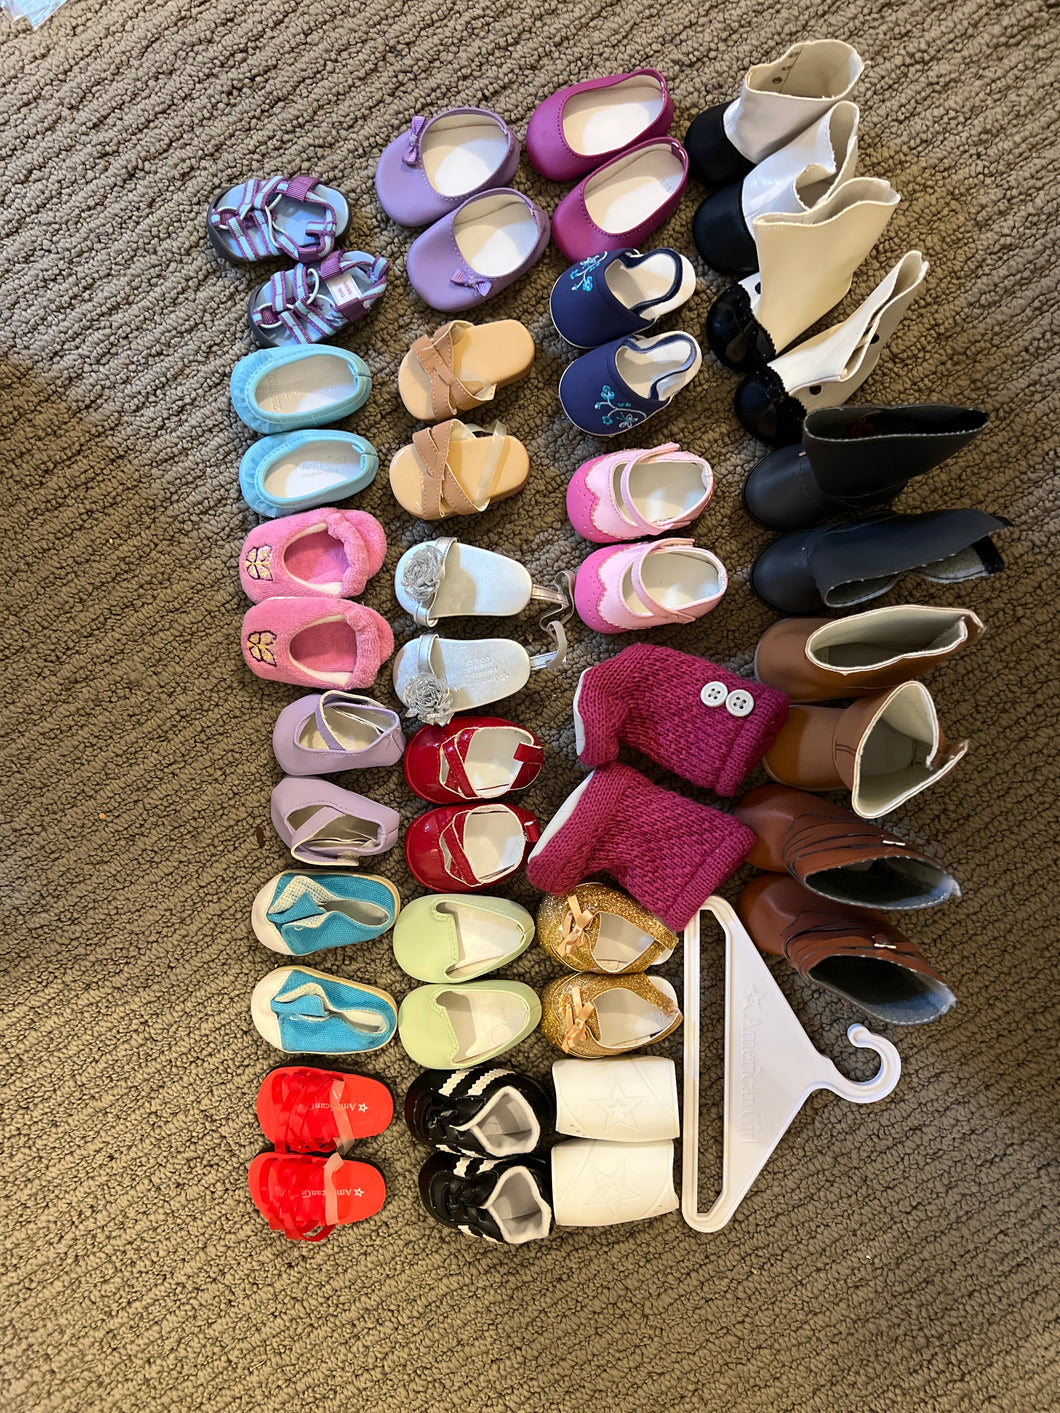 American Girl Doll Shoes